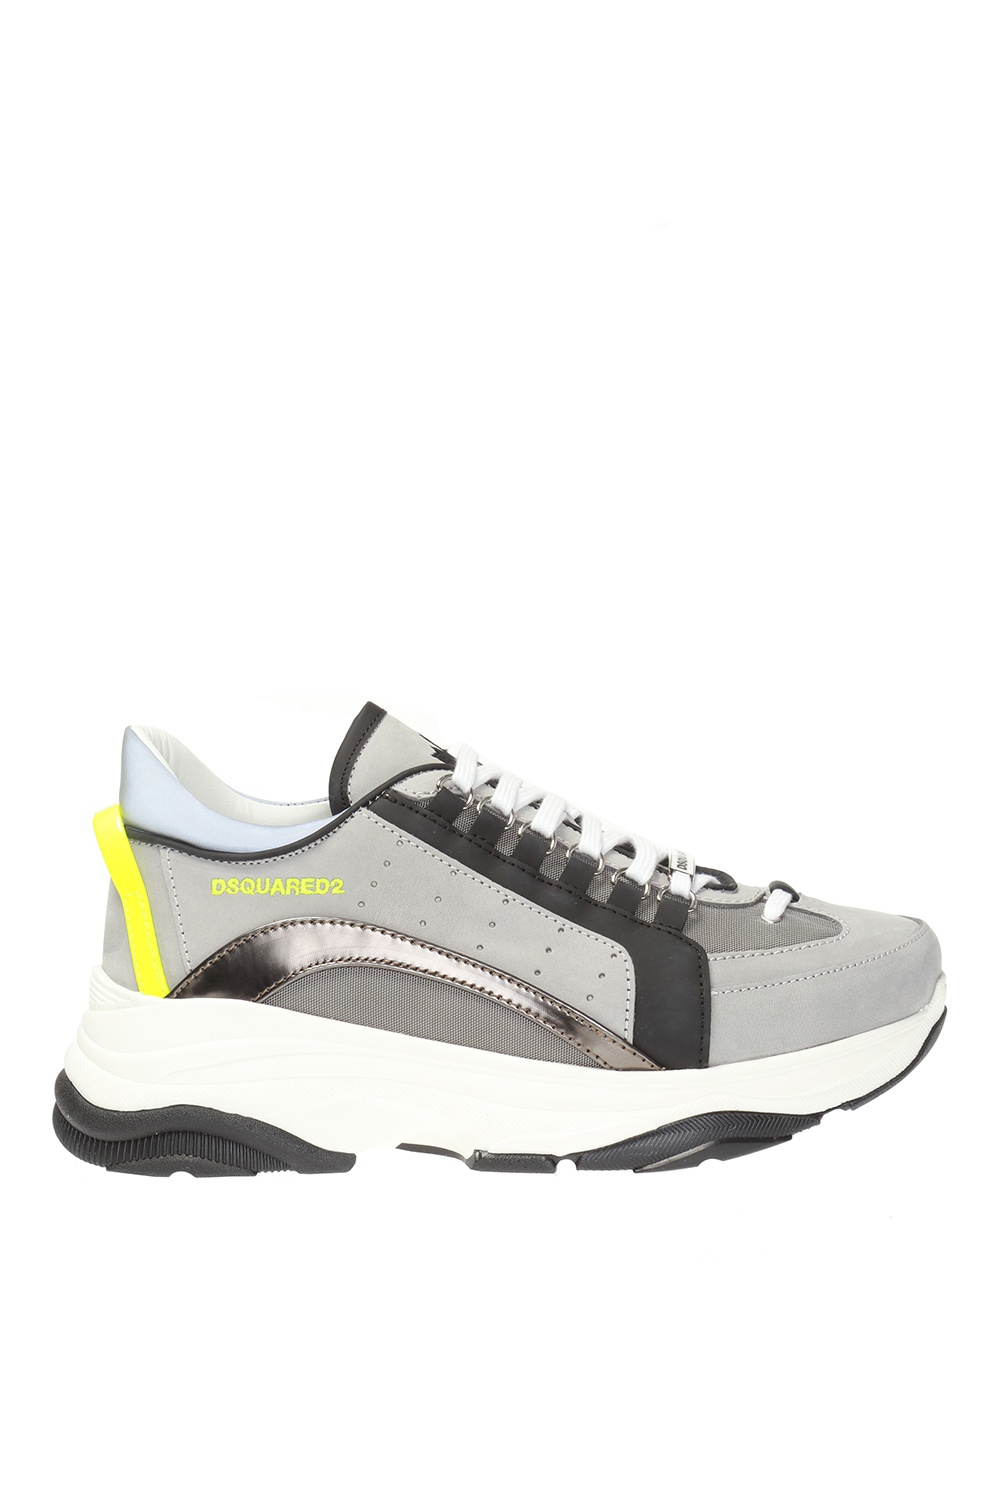 Bumpy 551' branded sneakers Dsquared2 